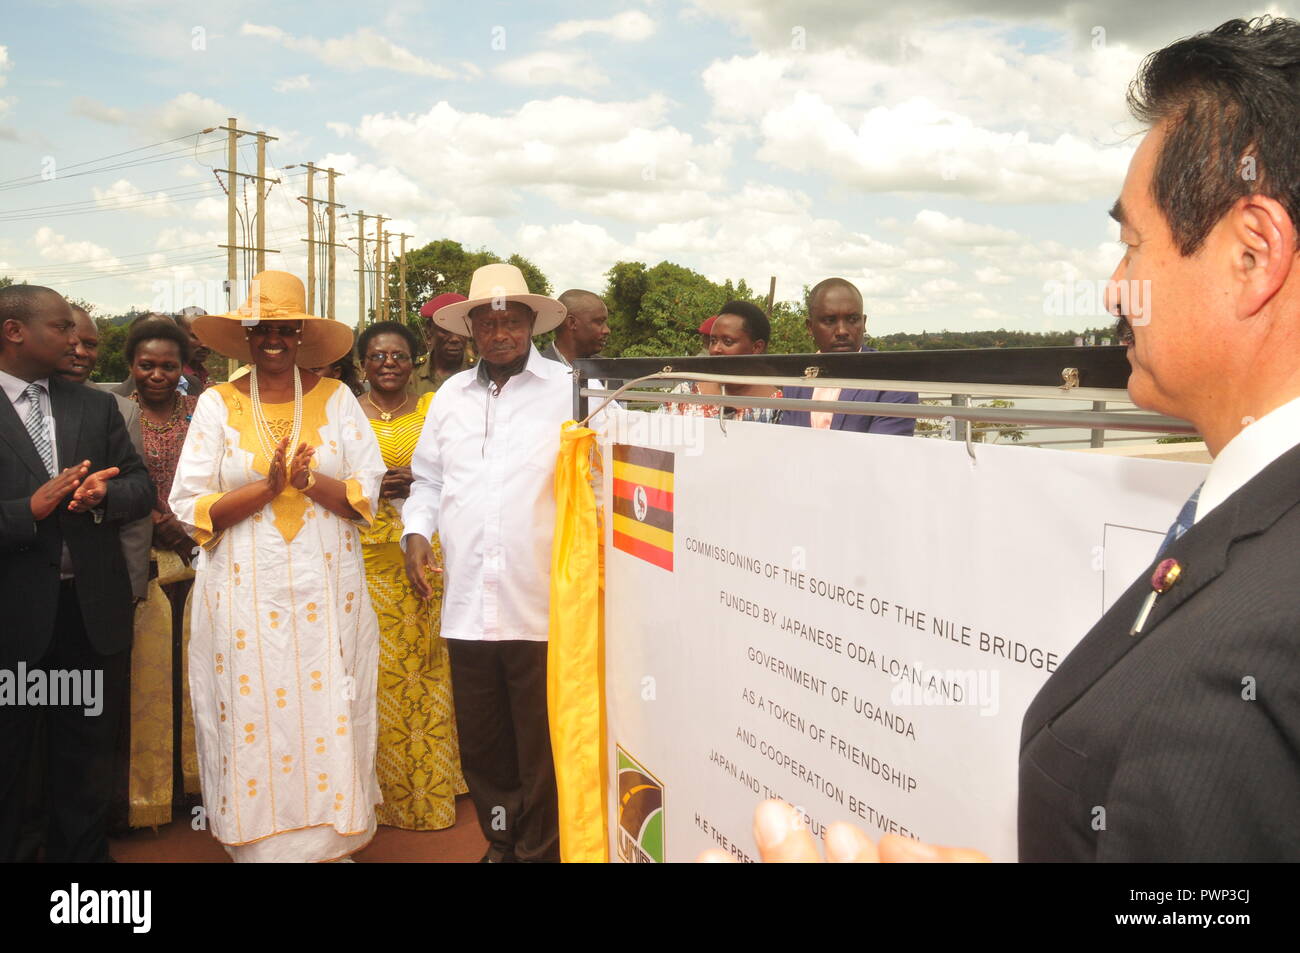 Jinja, Uganda. 17th October, 2018: President of Uganda Yoweri Museveni (middle) and the Vice Minister of Foreign Affairs in Japan Sato Masahisa (right) commissioning the Source of the Nile Bridge in Jinja. Looking on is the First Lady Janet Museveni (2nd left). Credit; Donald Kiirya/Alamy Live News. Stock Photo